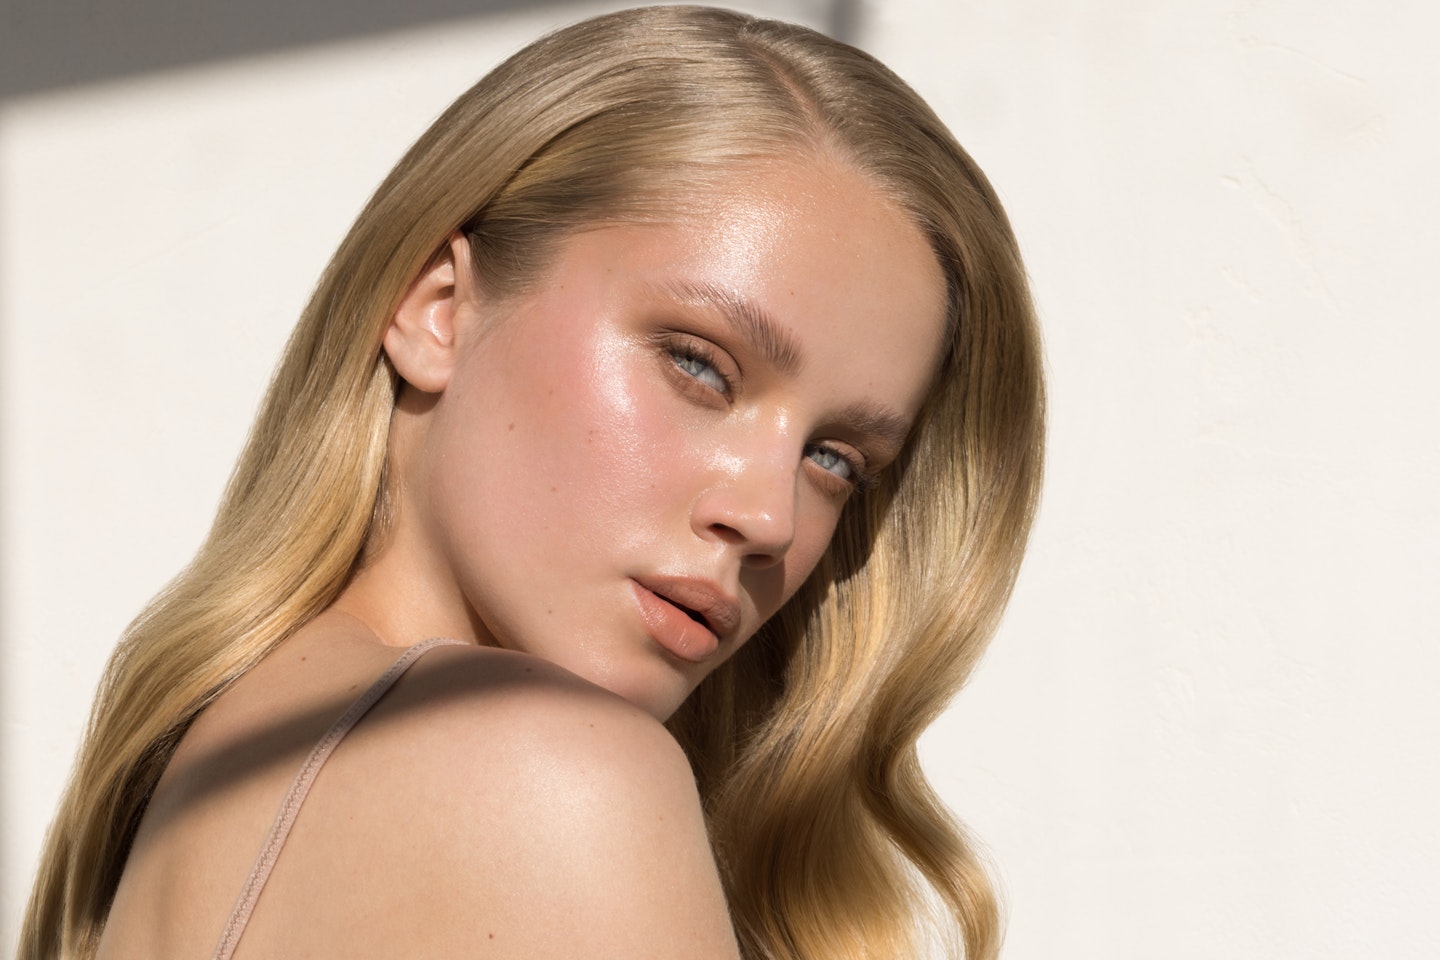 The Best Lightweight Foundation of 2022 for Glowy Skin